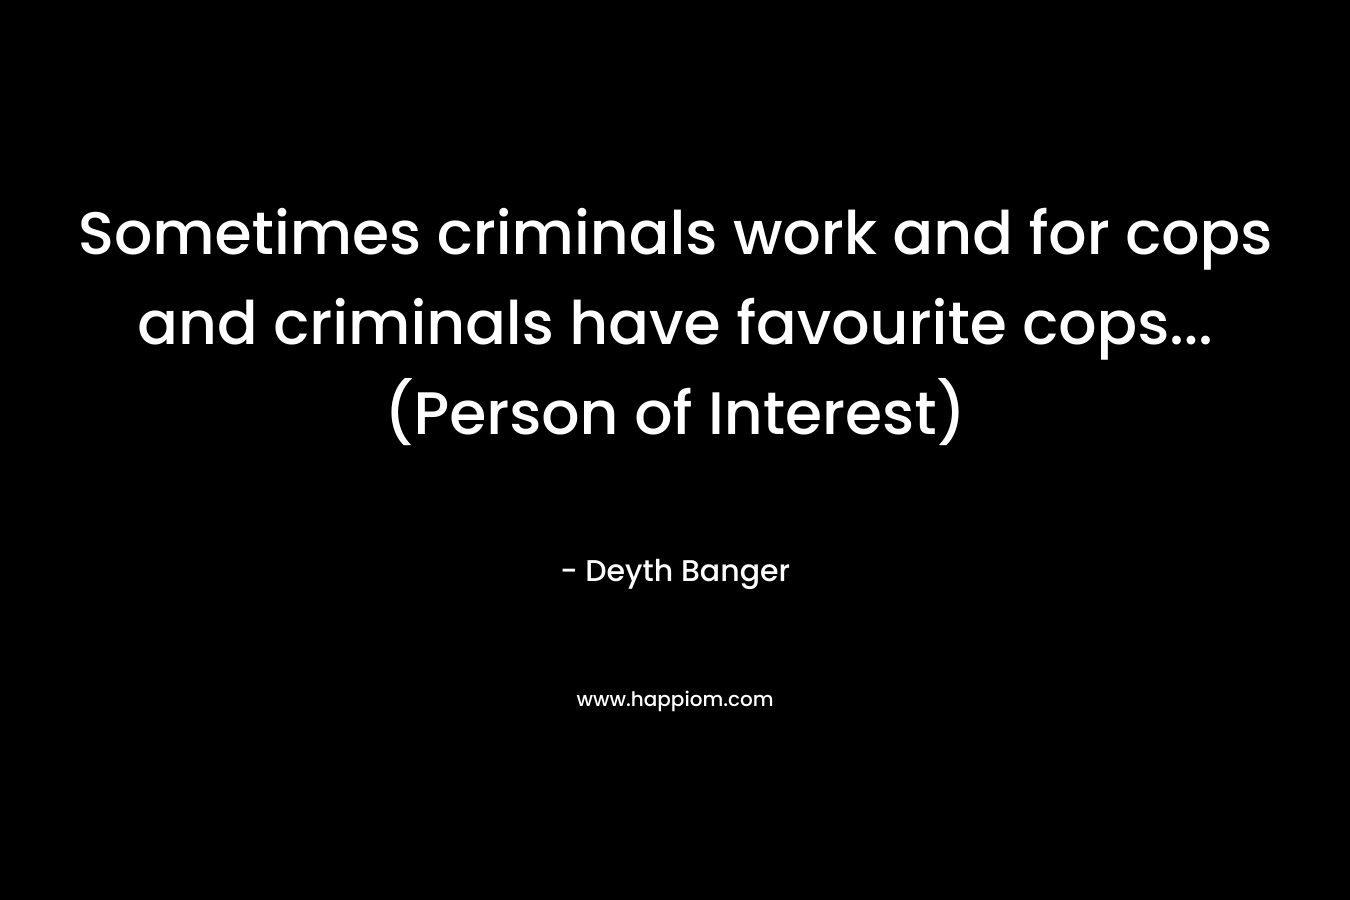 Sometimes criminals work and for cops and criminals have favourite cops... (Person of Interest)